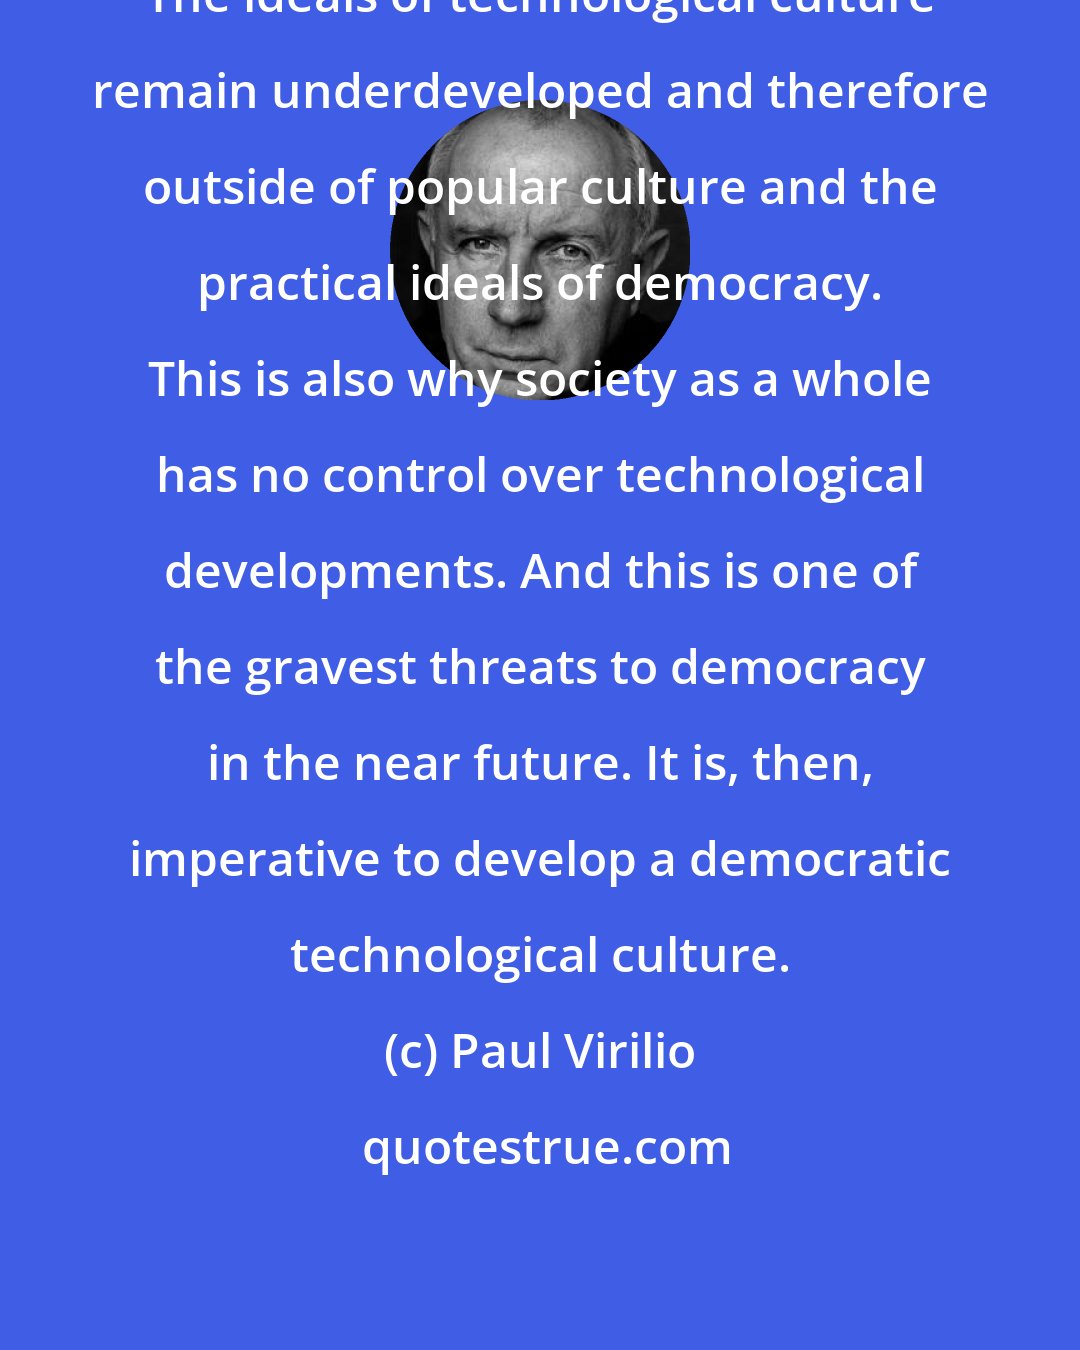 Paul Virilio: The ideals of technological culture remain underdeveloped and therefore outside of popular culture and the practical ideals of democracy. This is also why society as a whole has no control over technological developments. And this is one of the gravest threats to democracy in the near future. It is, then, imperative to develop a democratic technological culture.